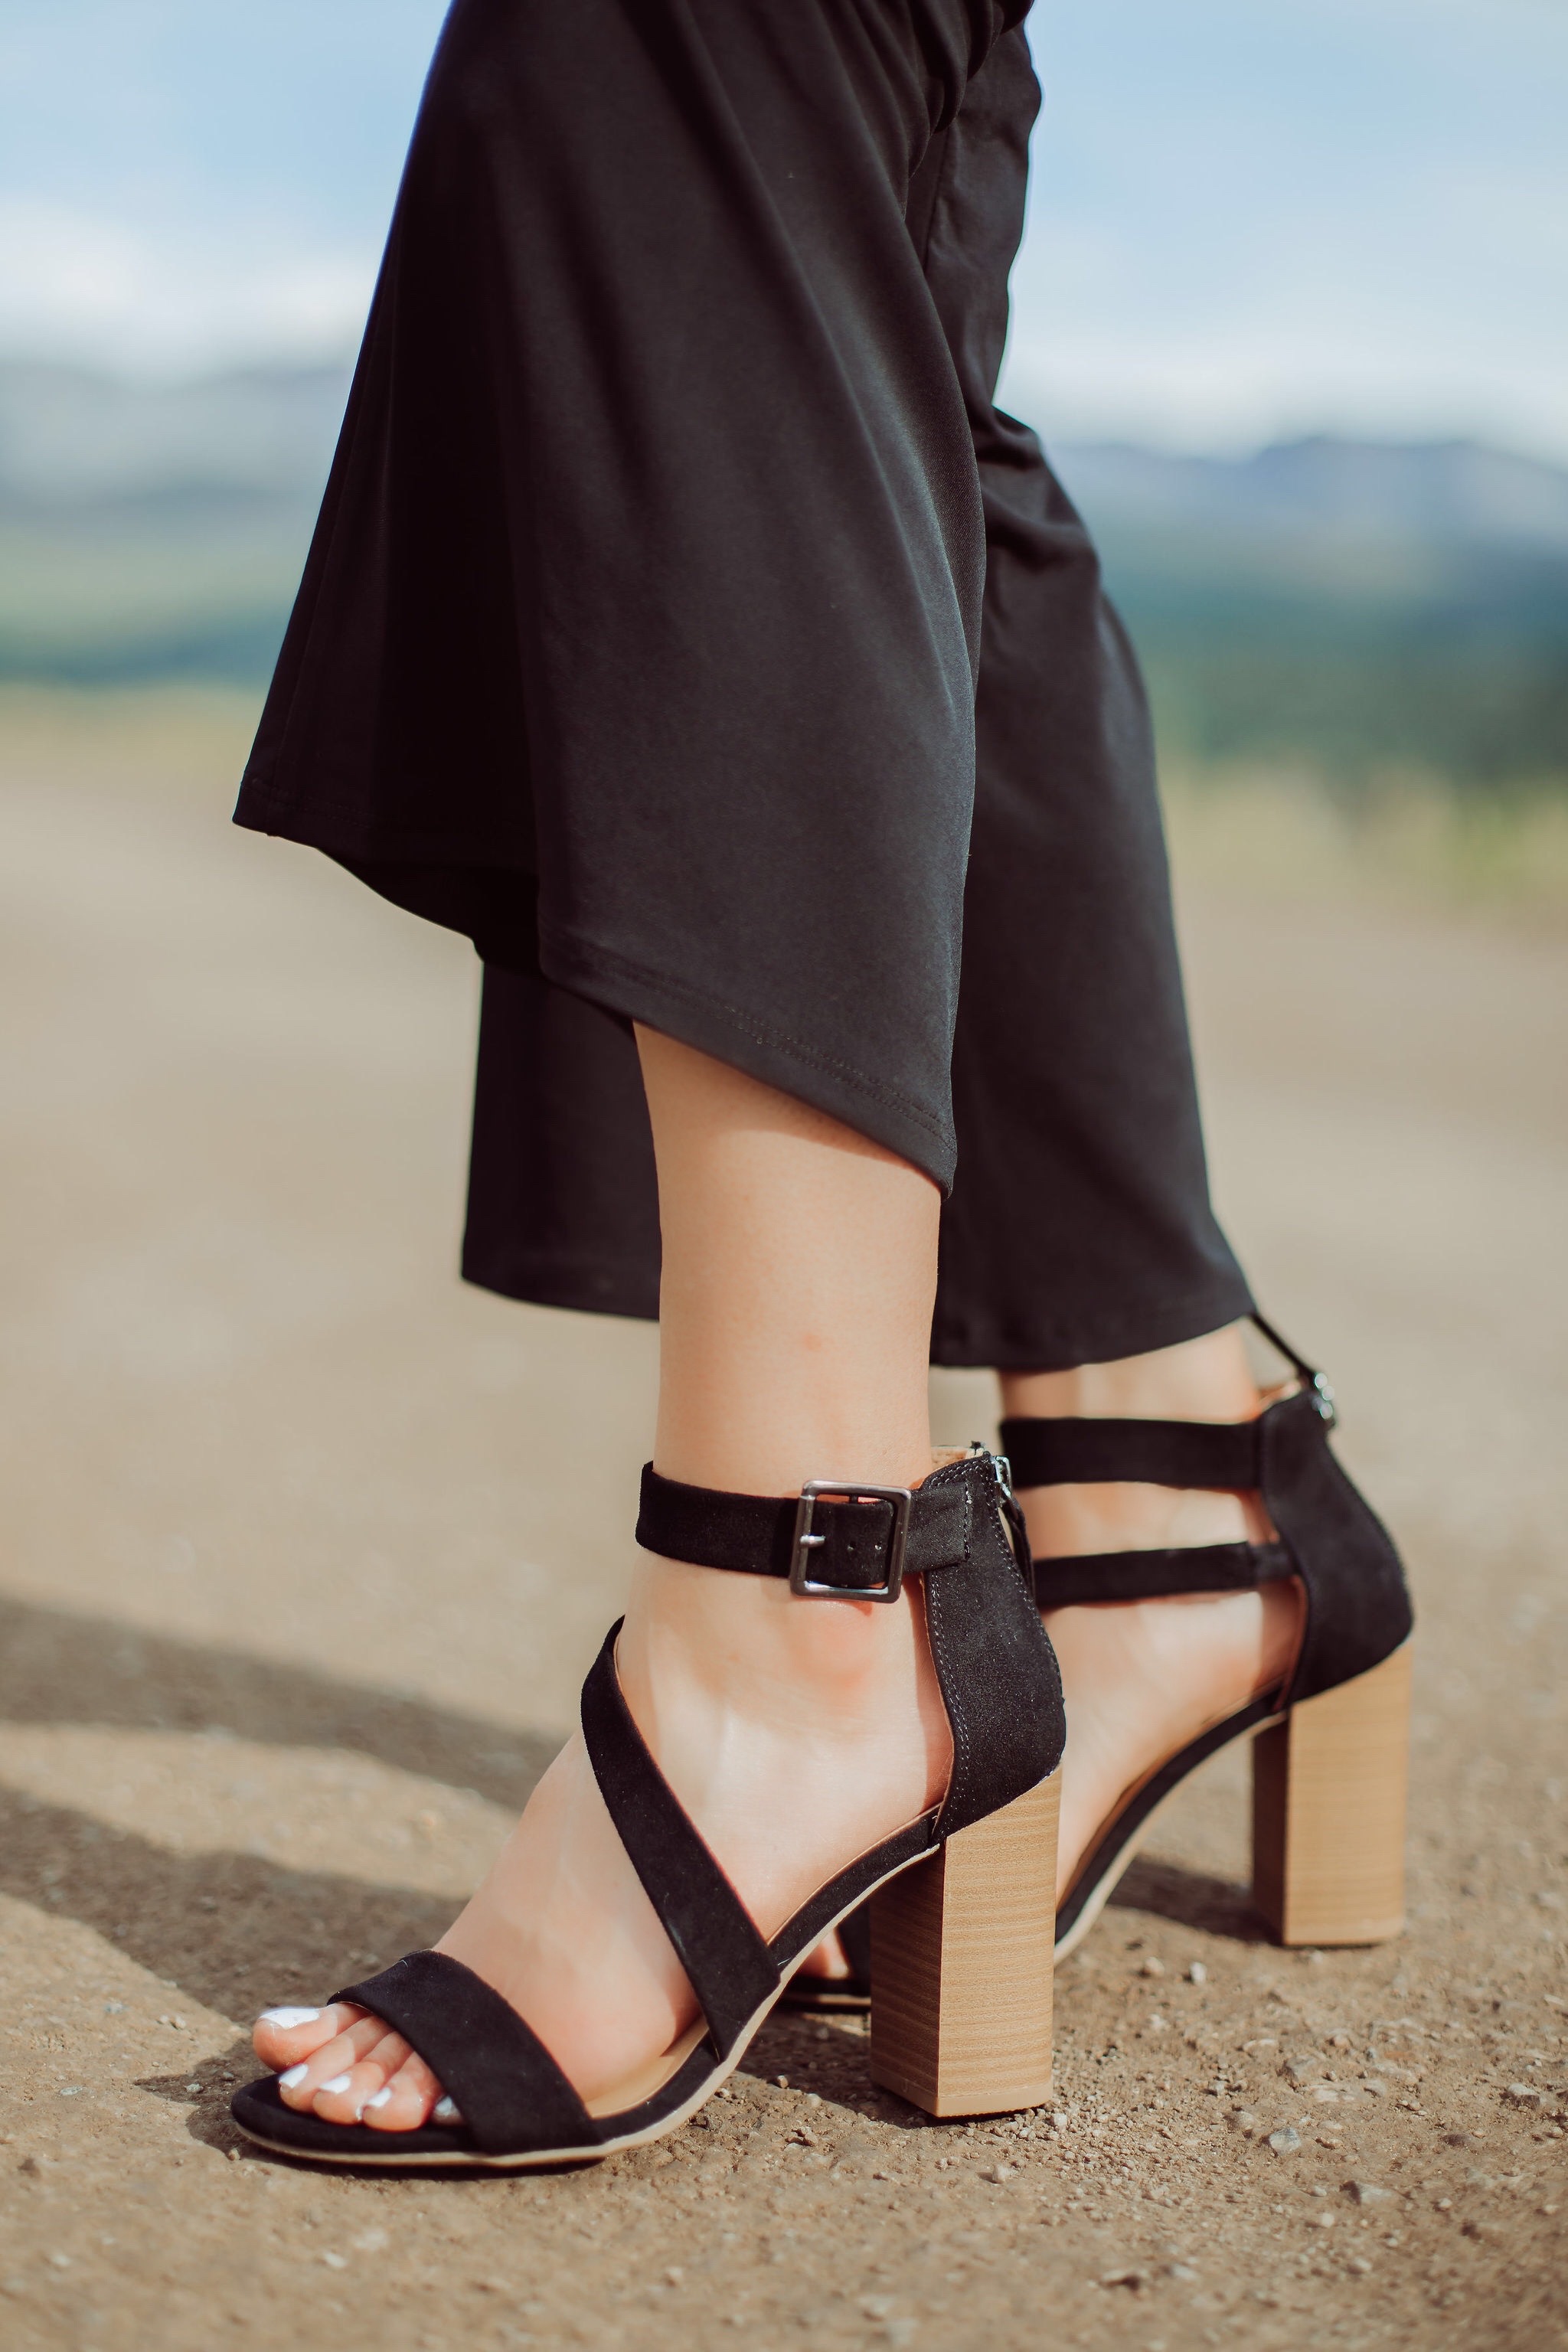 Jumpsuits Over 40, Fashion Blogger Erin Busbee of Busbee Style wearing a black flared jumpsuit by Scoop and black strappy block heel sandals by Scoop from Walmart in Telluride, Colorado